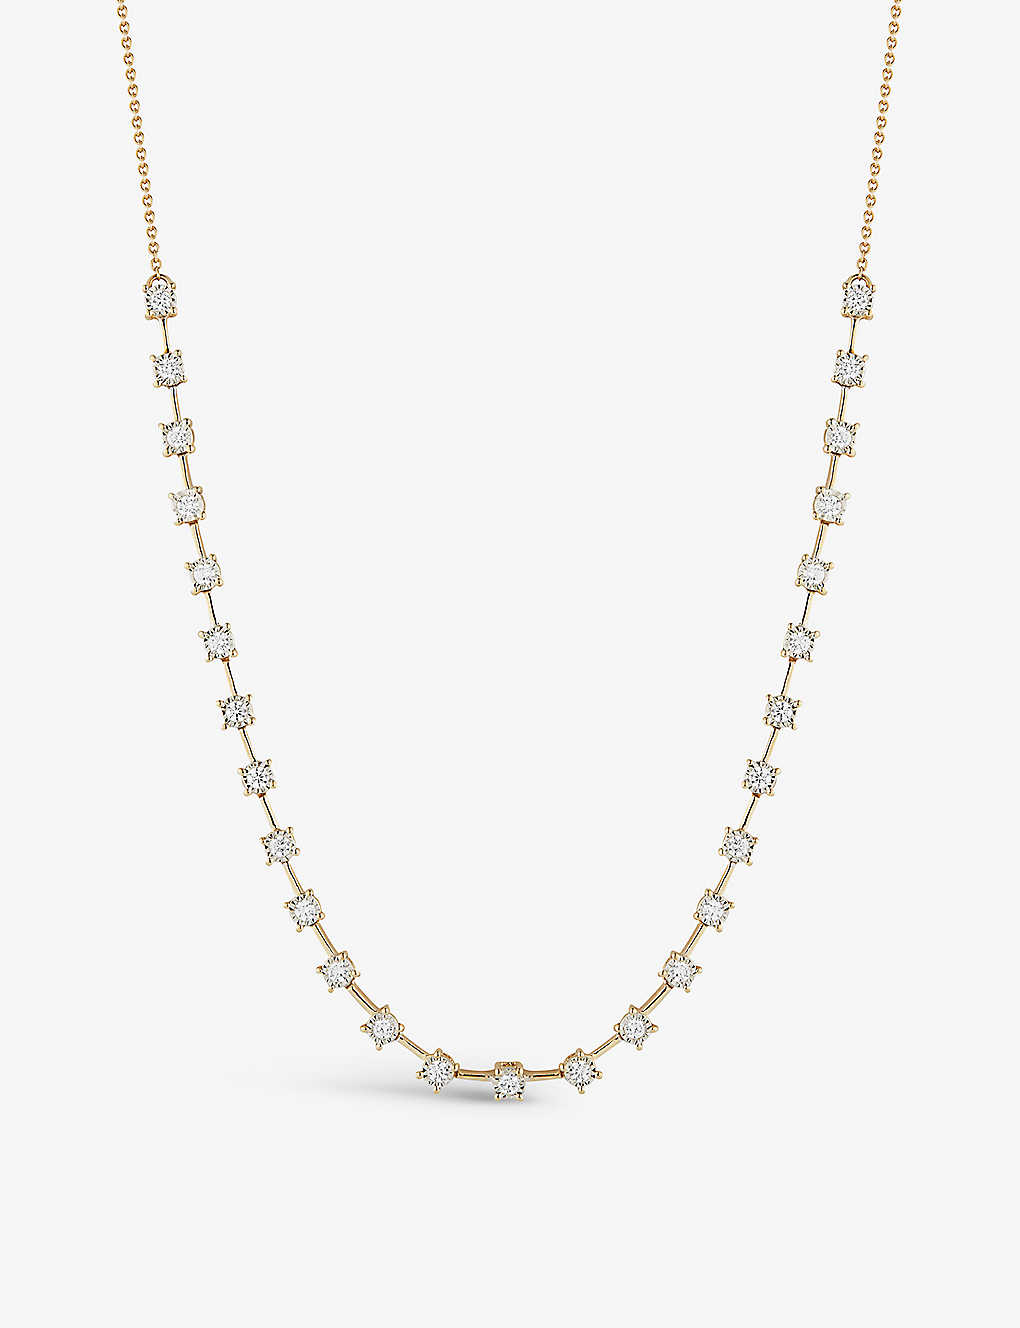 The Alkemistry Dana Rebecca Ava Bea Interval 18ct Yellow-gold And 0.48ct Diamond Tennis Necklace In 14ct Yellow Gold